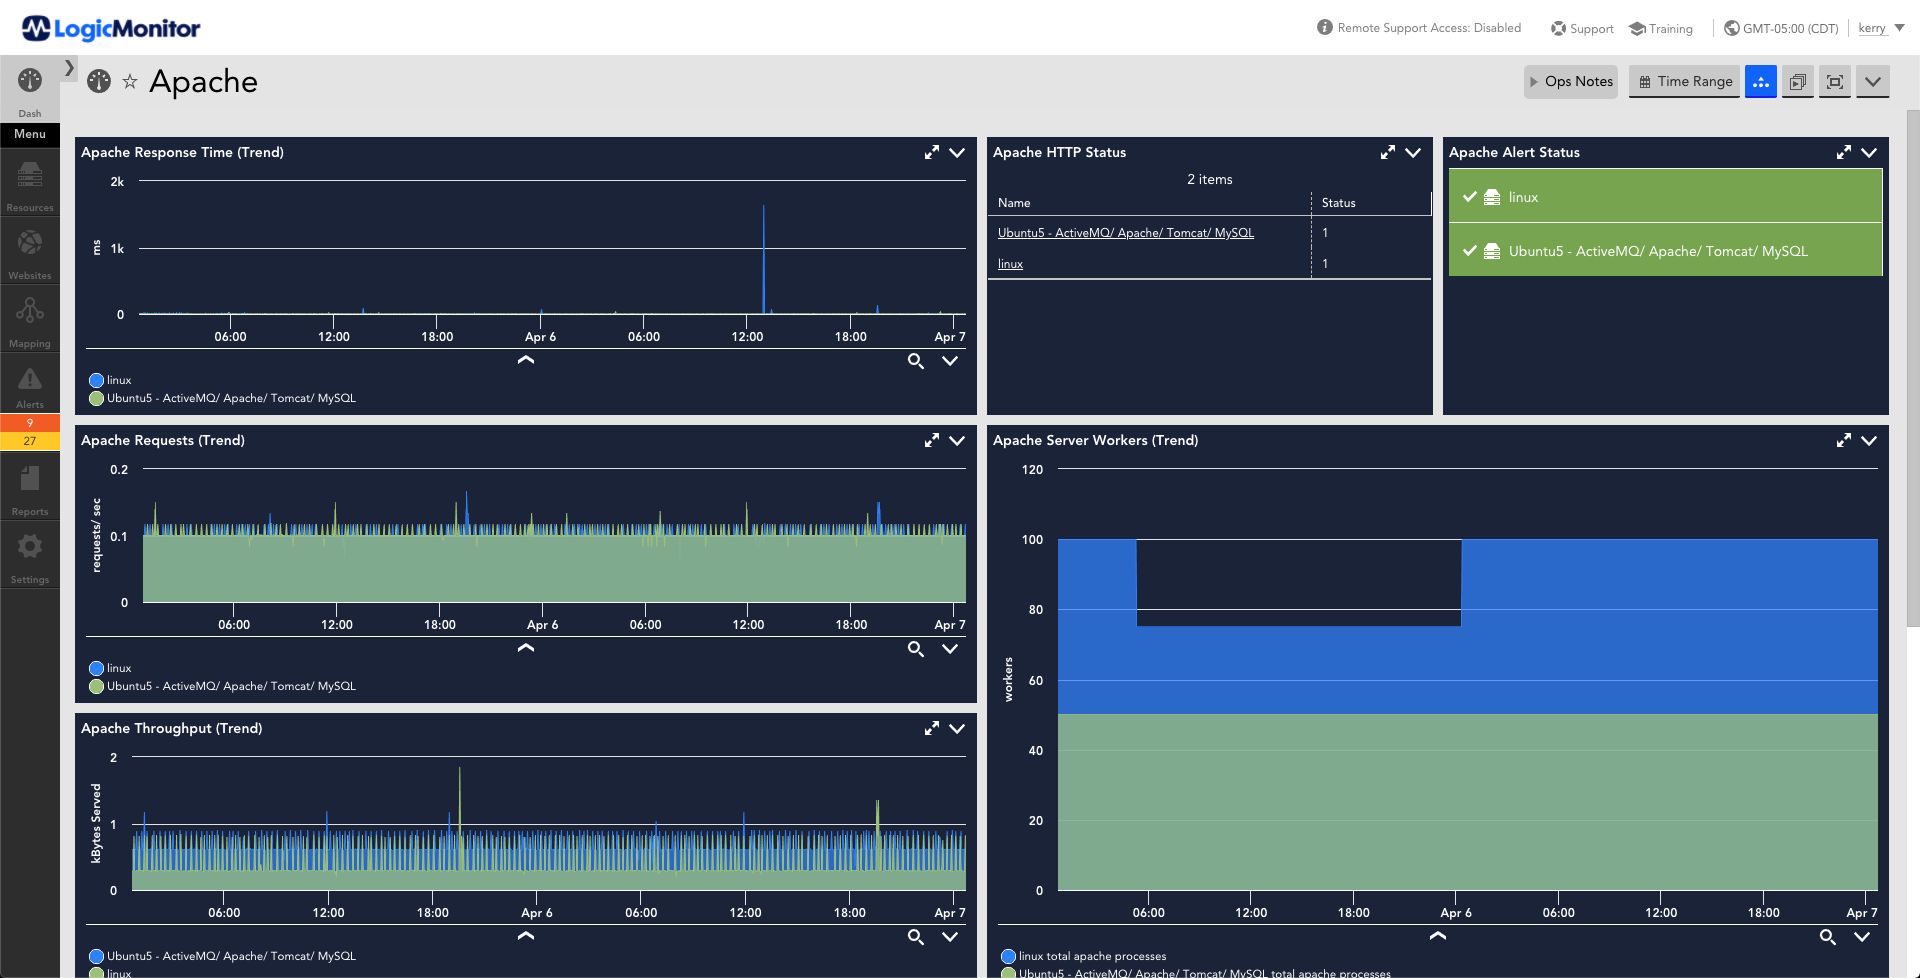 This dashboard provides status of Apache servers. The metrics displayed are response time, HTTP status, alert status, requests over time, server workers over time, throughput over time